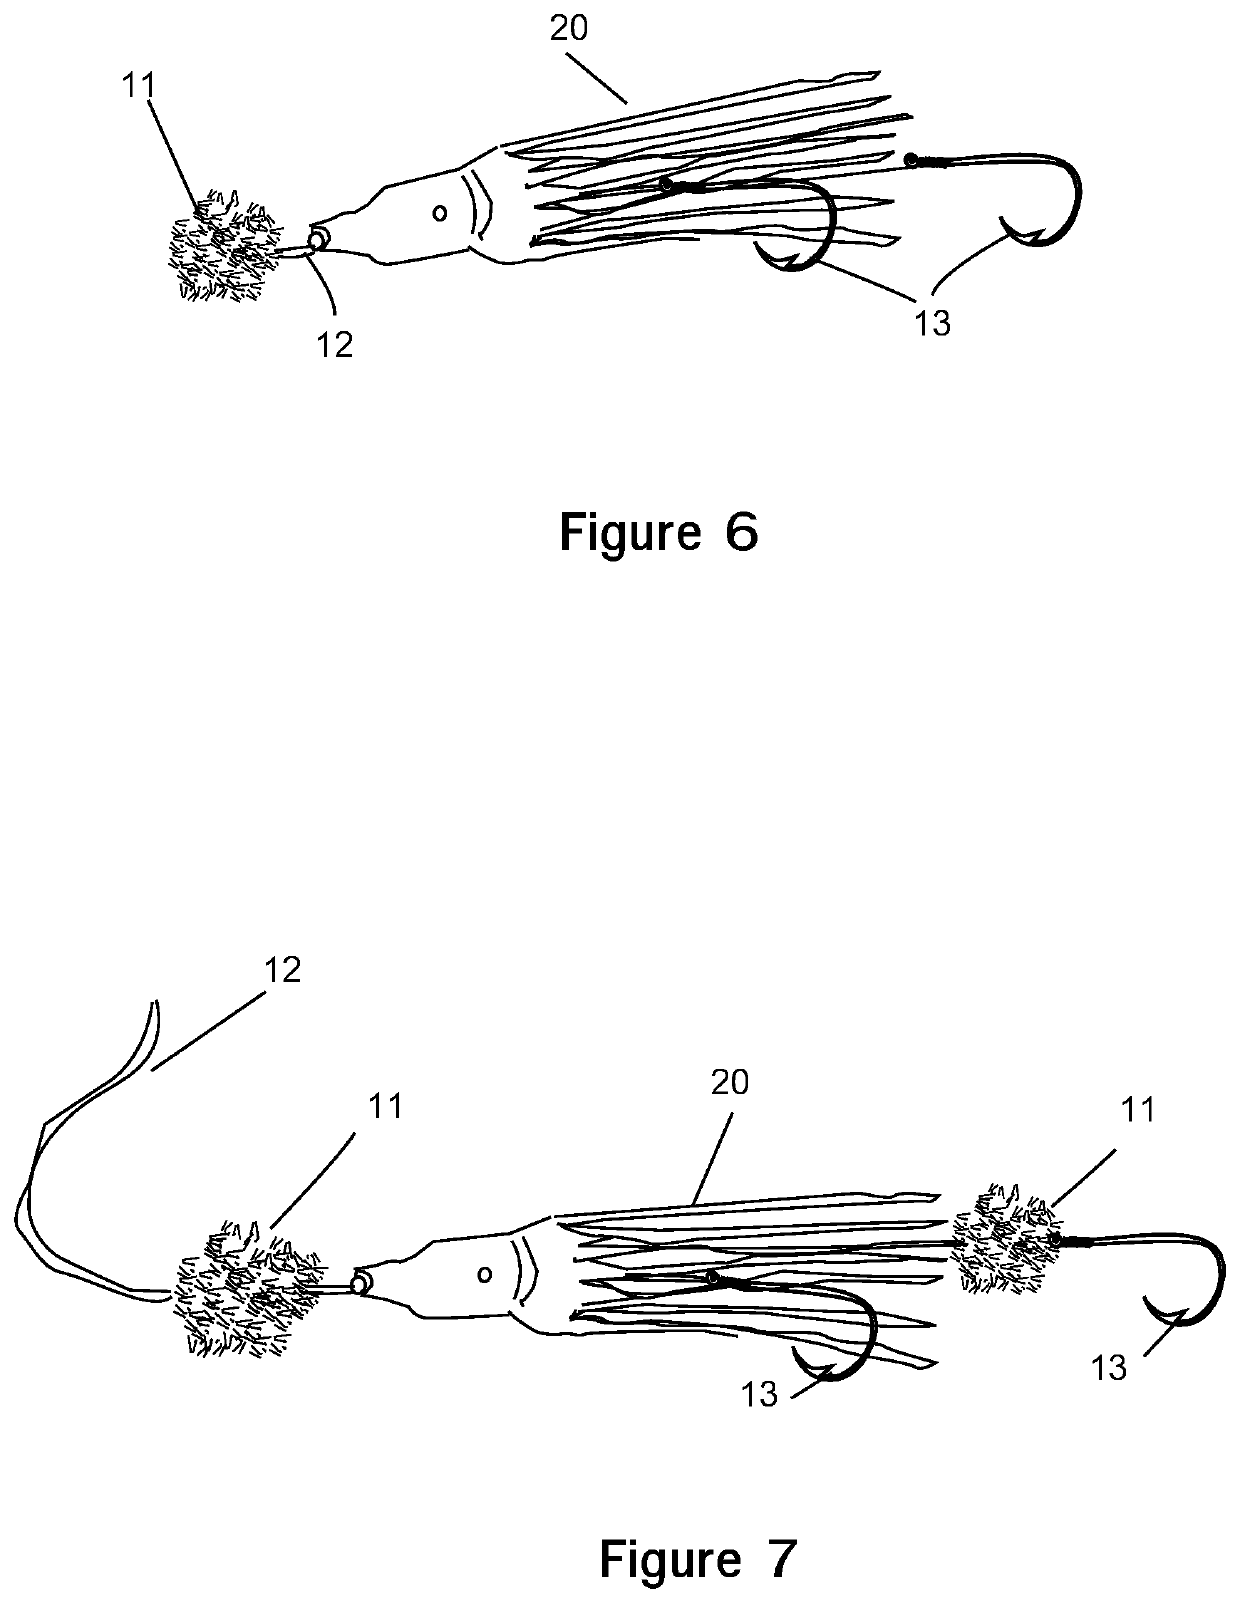 Fishing lure with a scent disbursement apparatus